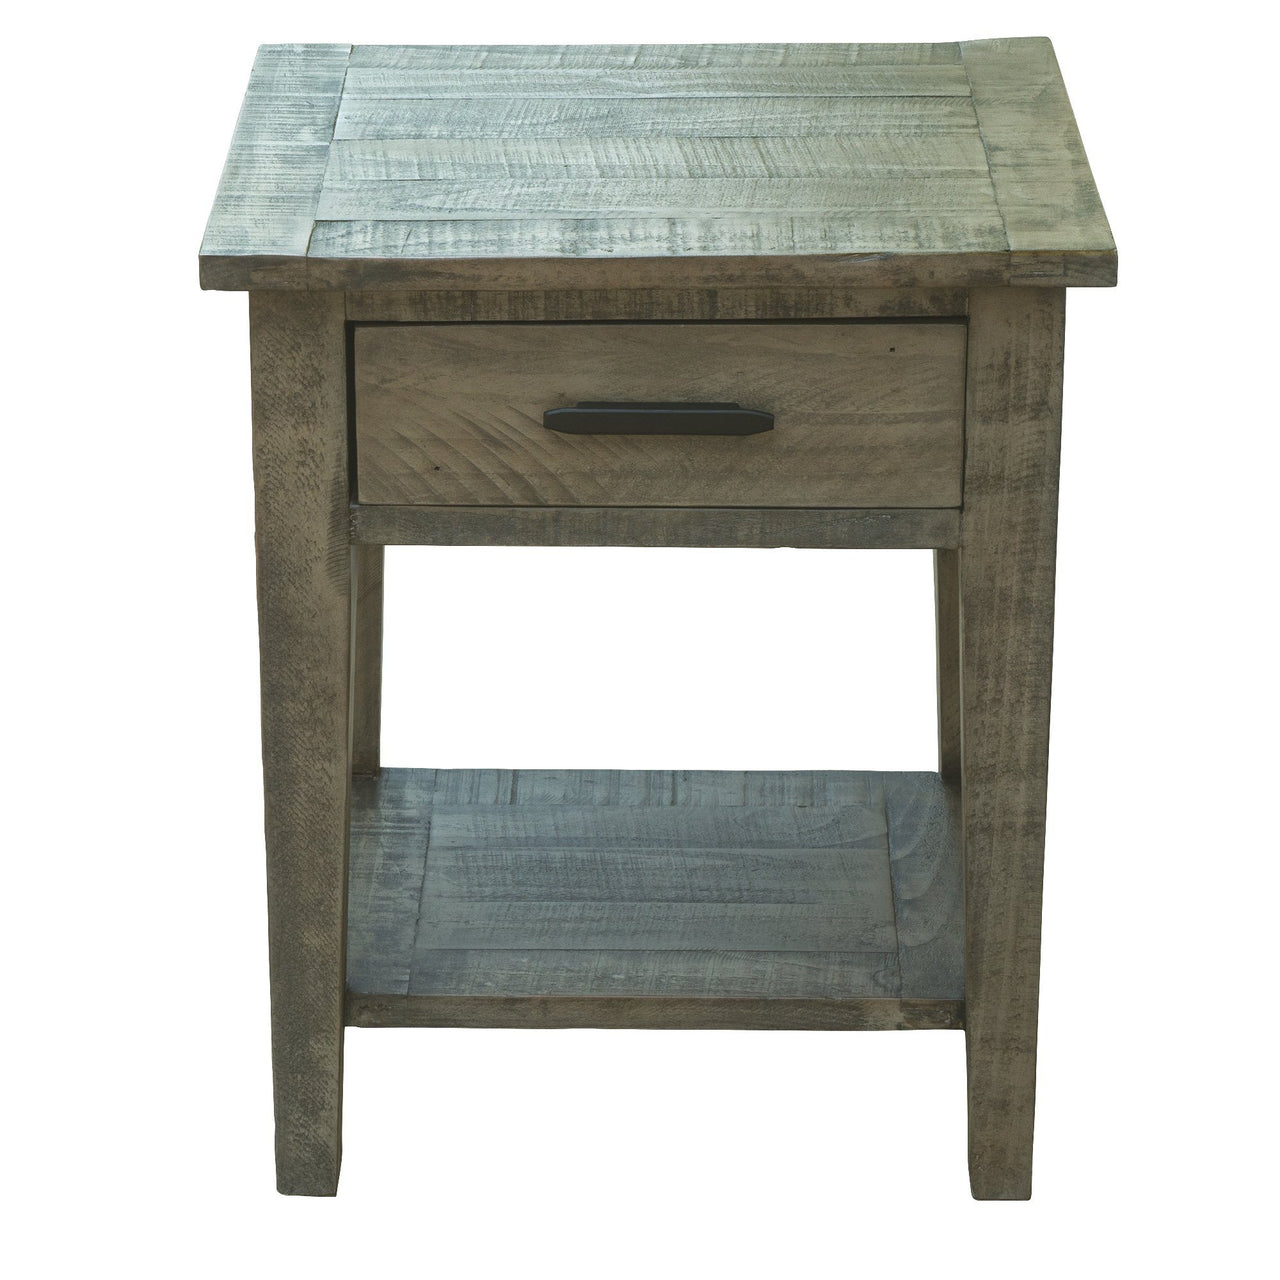 Ashford 20" Reclaimed Wood Lamp Table with Storage Shelf and One Drawer End Table AndMakers Grey 